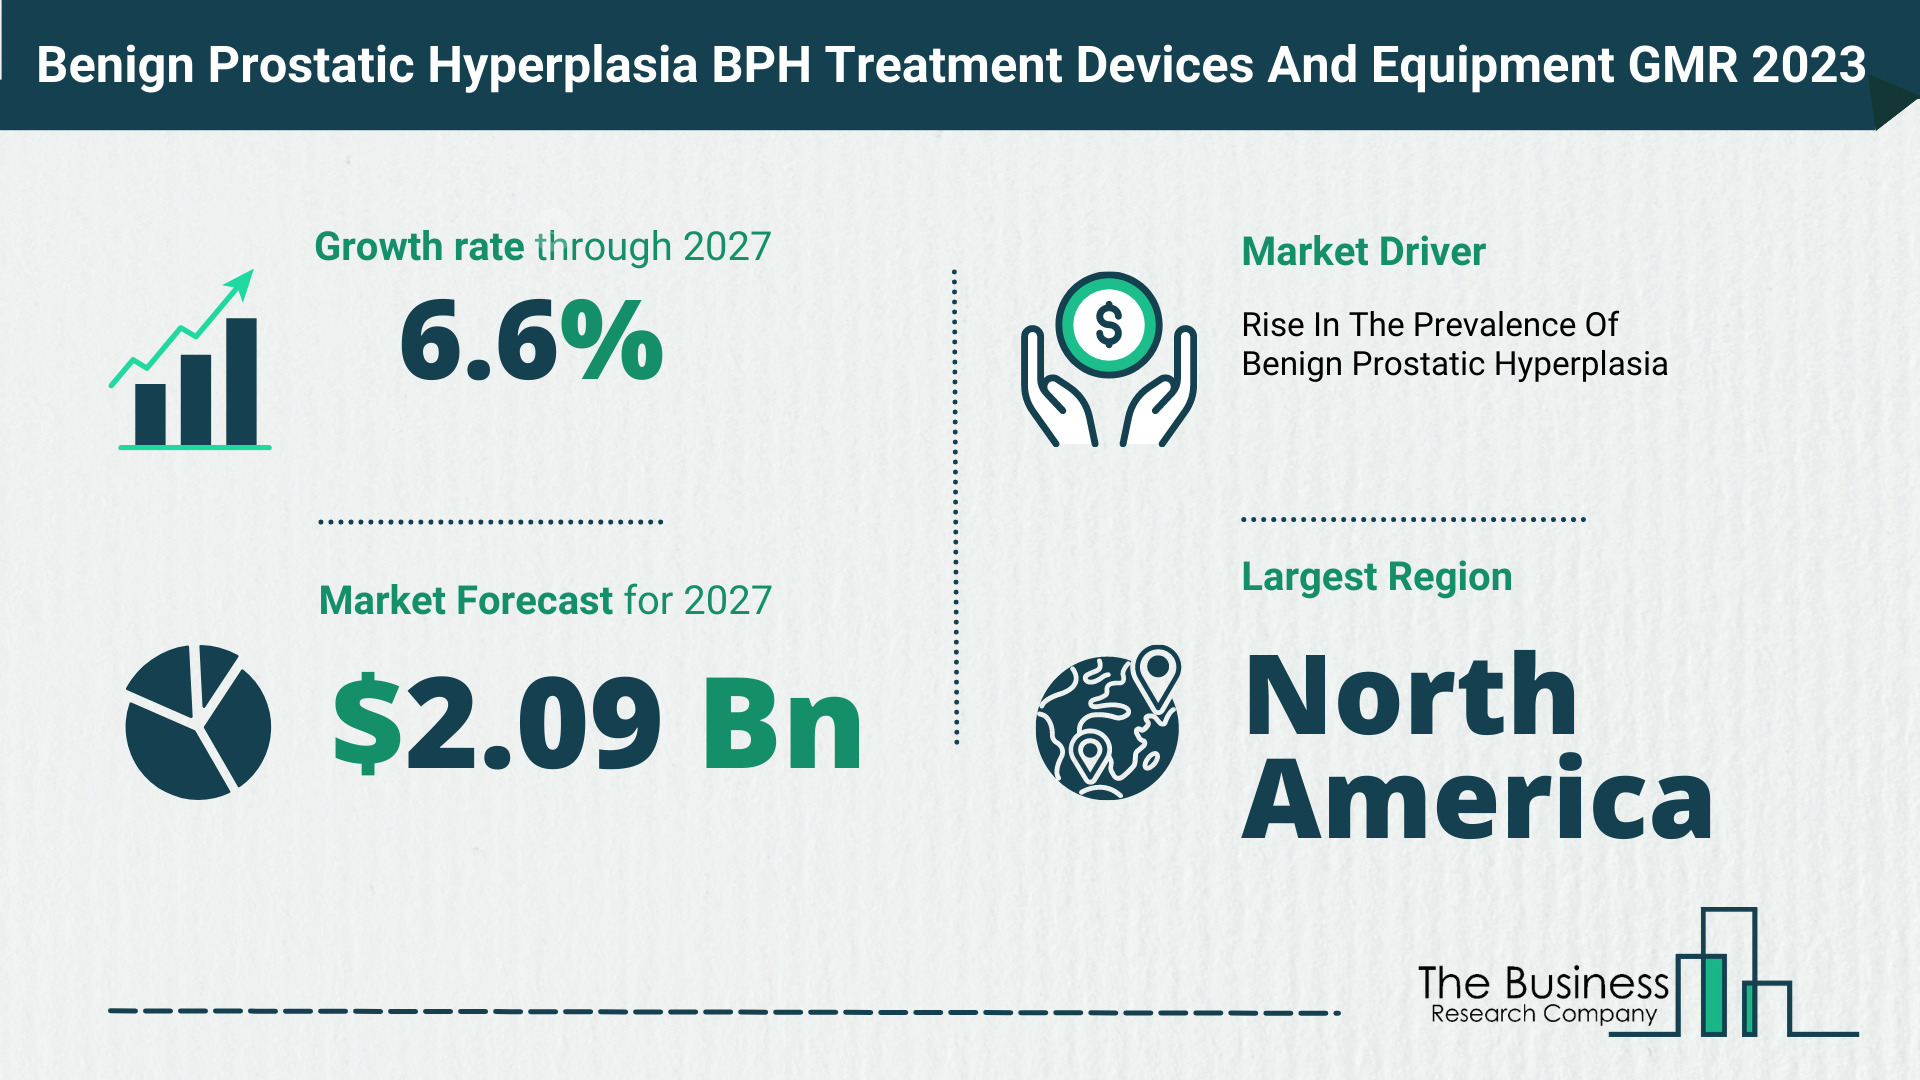 Comprehensive Benign Prostatic Hyperplasia BPH Treatment Devices And Equipment Market Analysis, By The Business Research Company